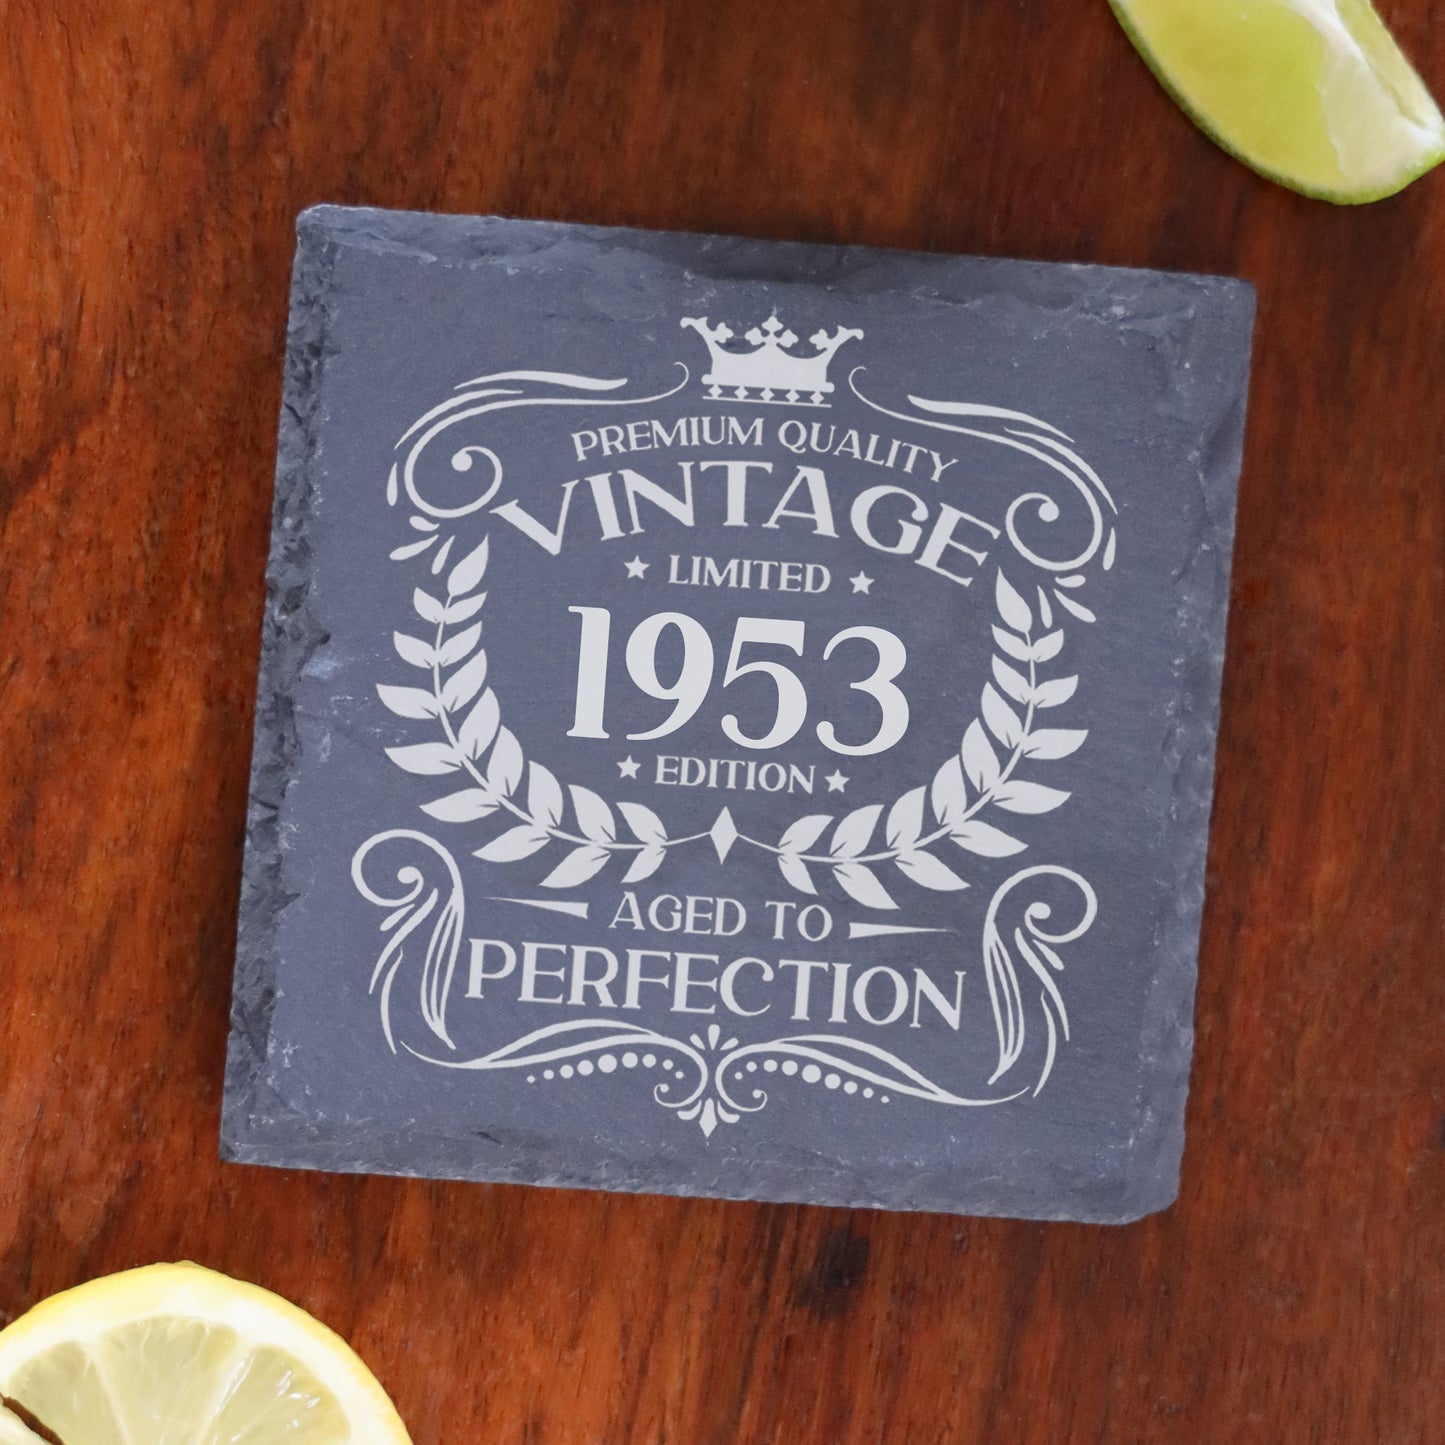 Personalised Vintage 1953 Mug and/or Coaster  - Always Looking Good - Square Coaster On Its Own  